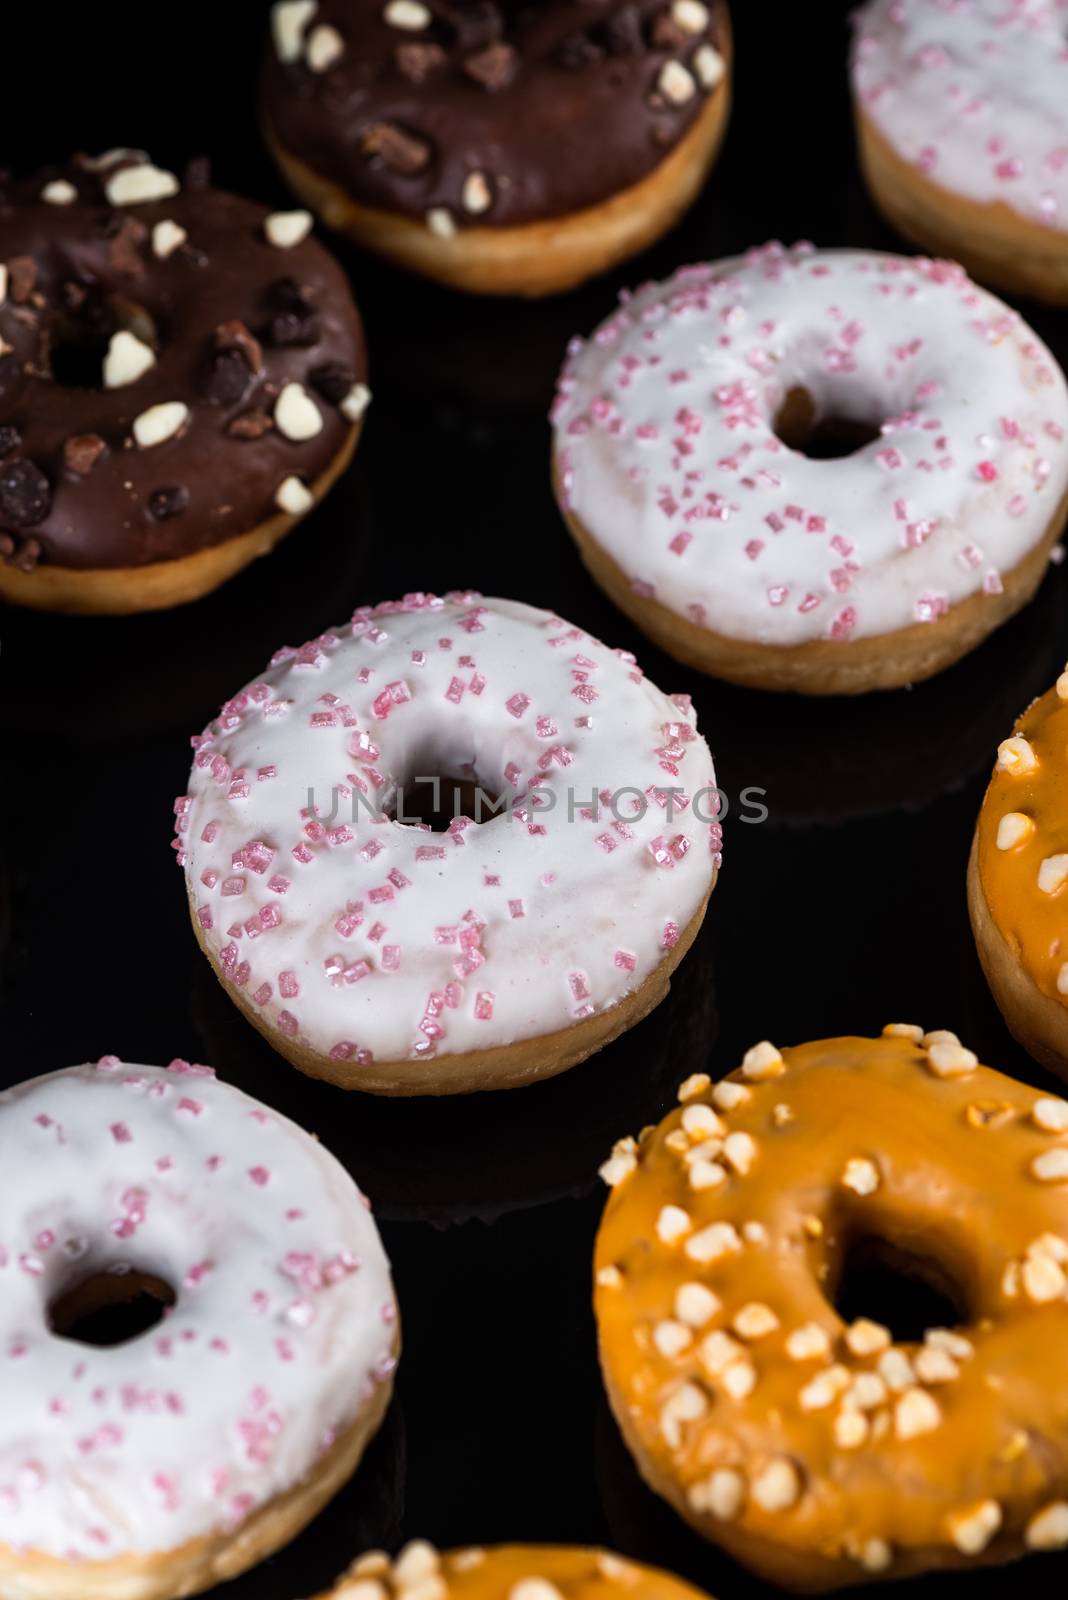 Decorated Donuts or Doughnuts Flat Lay on Dark Background.